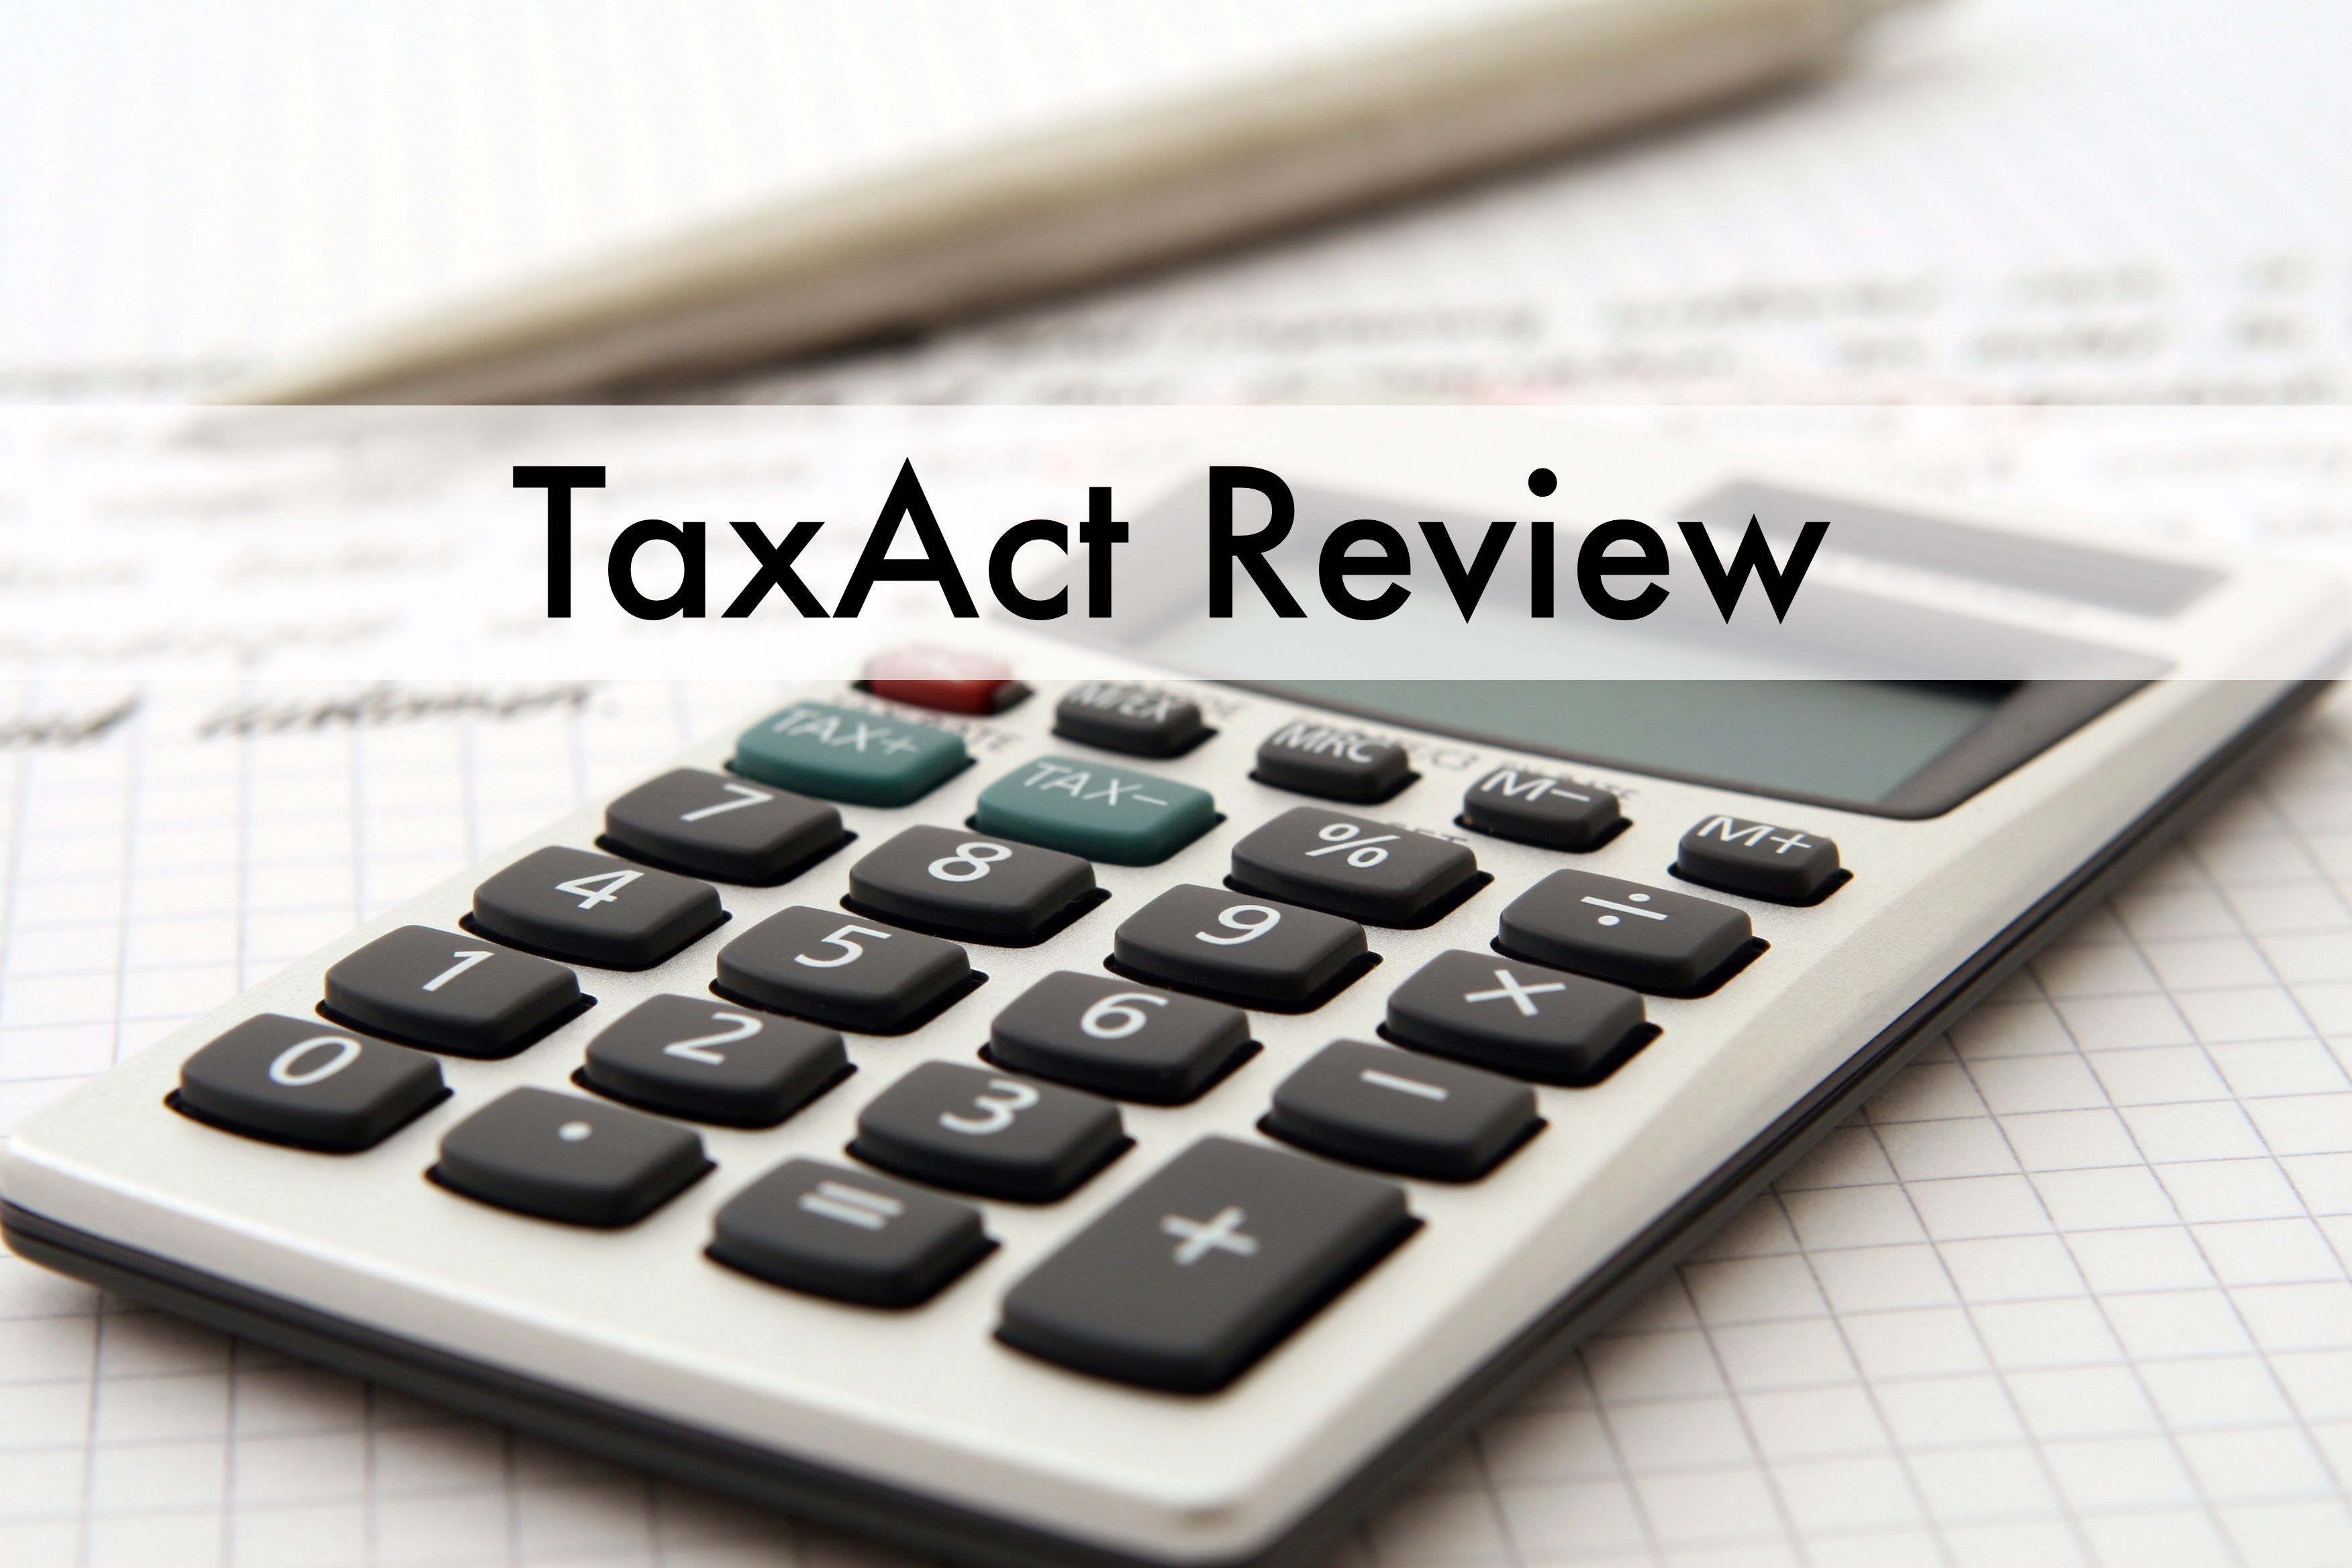 TaxAct Review